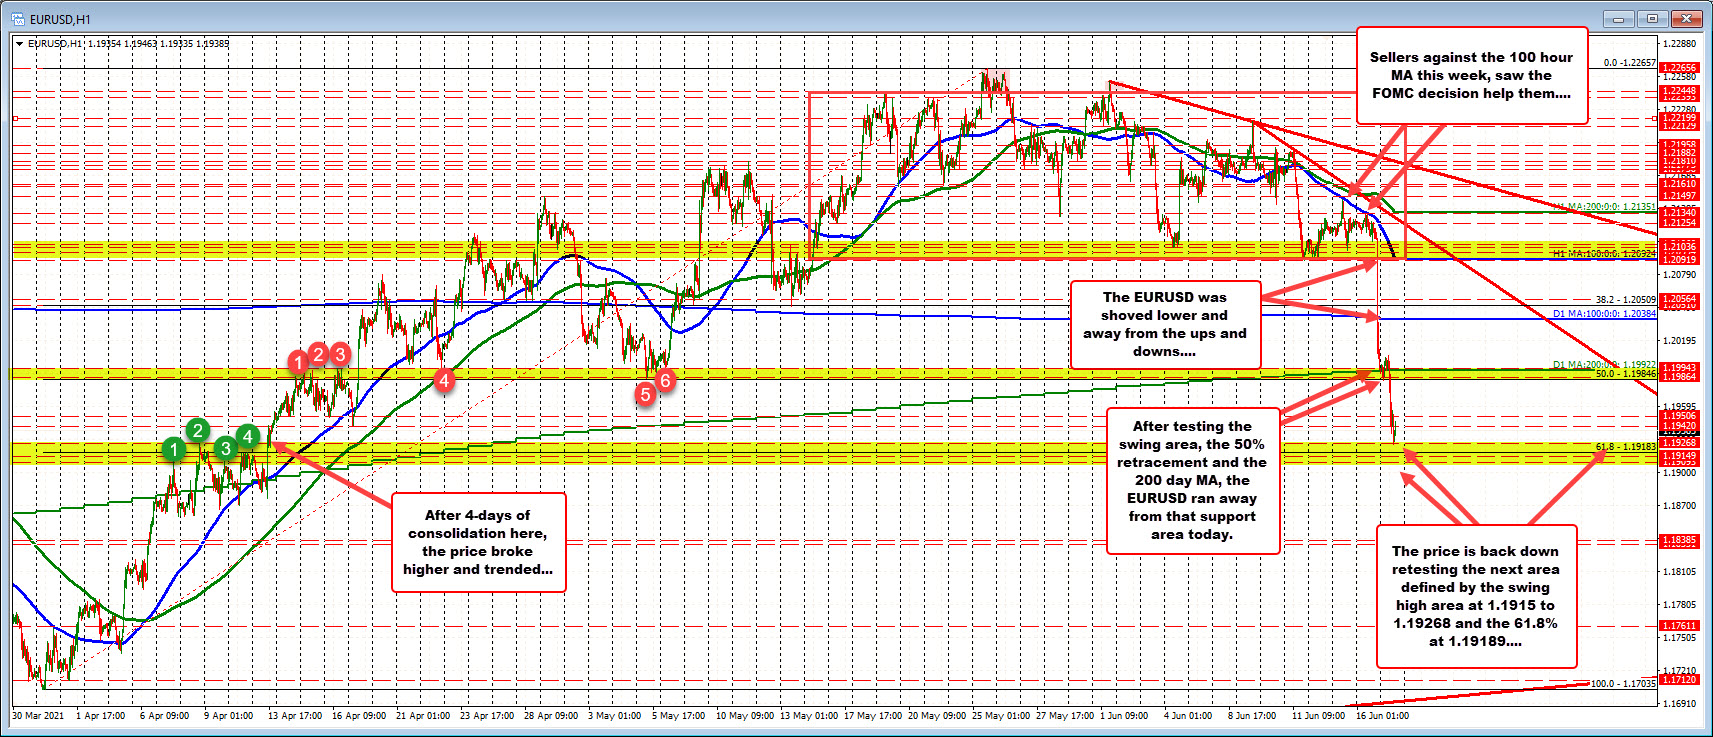 The EURUSD moved away from 50% and old swing area today and to another retracement and swing area